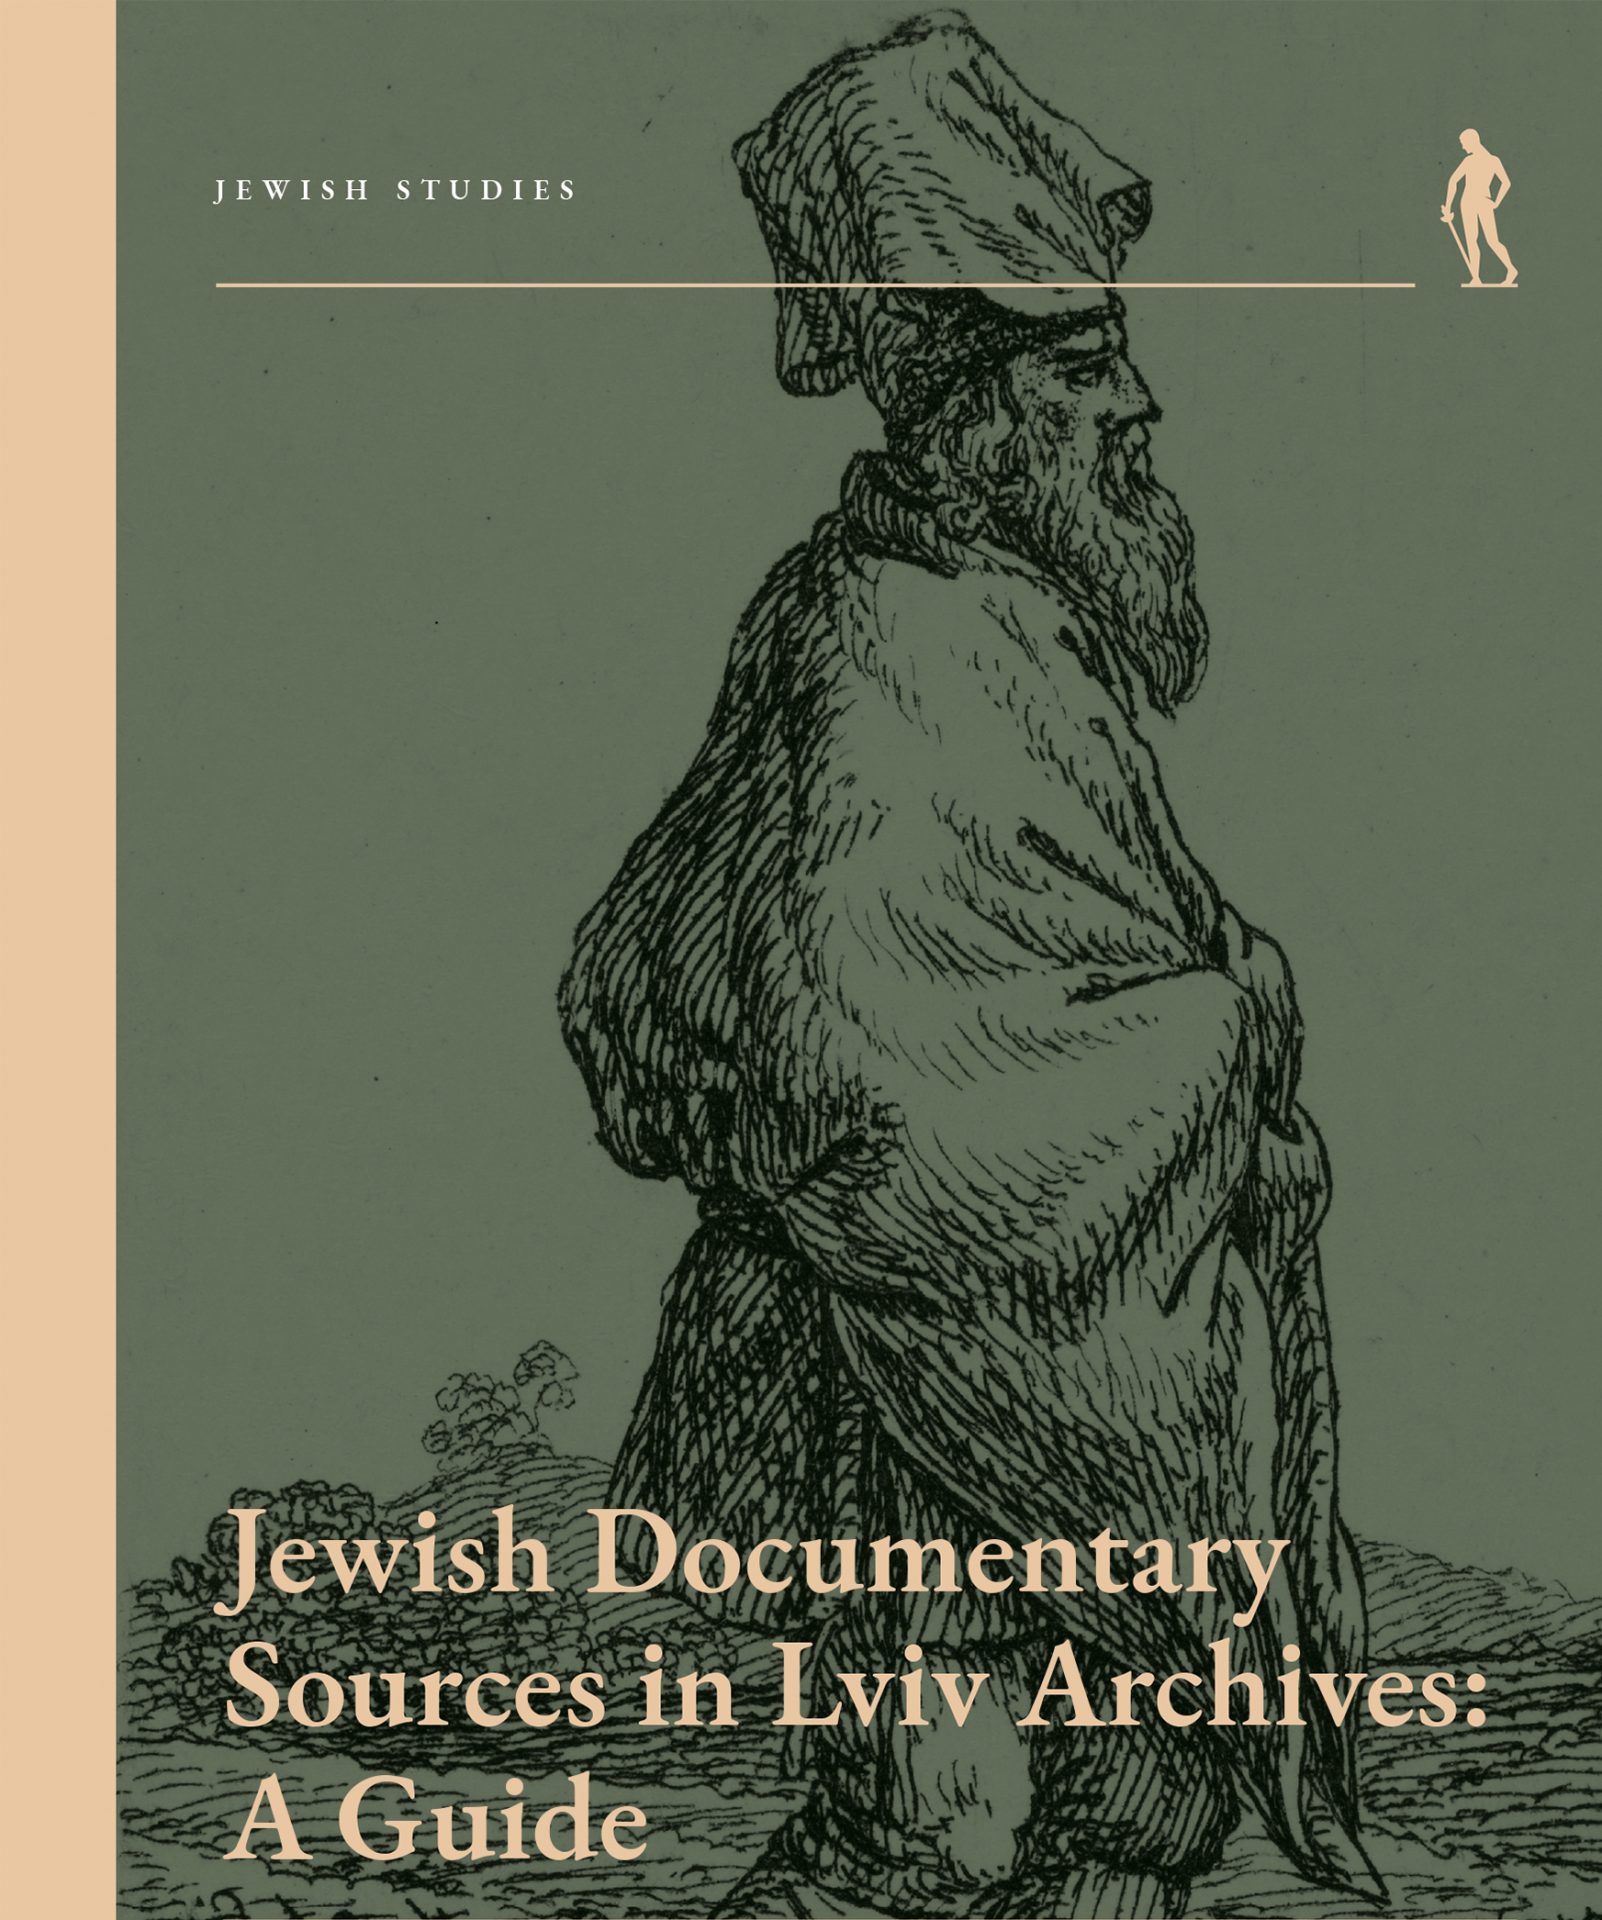 Jewish Documentary Sources in Lviv Archives: A Guide